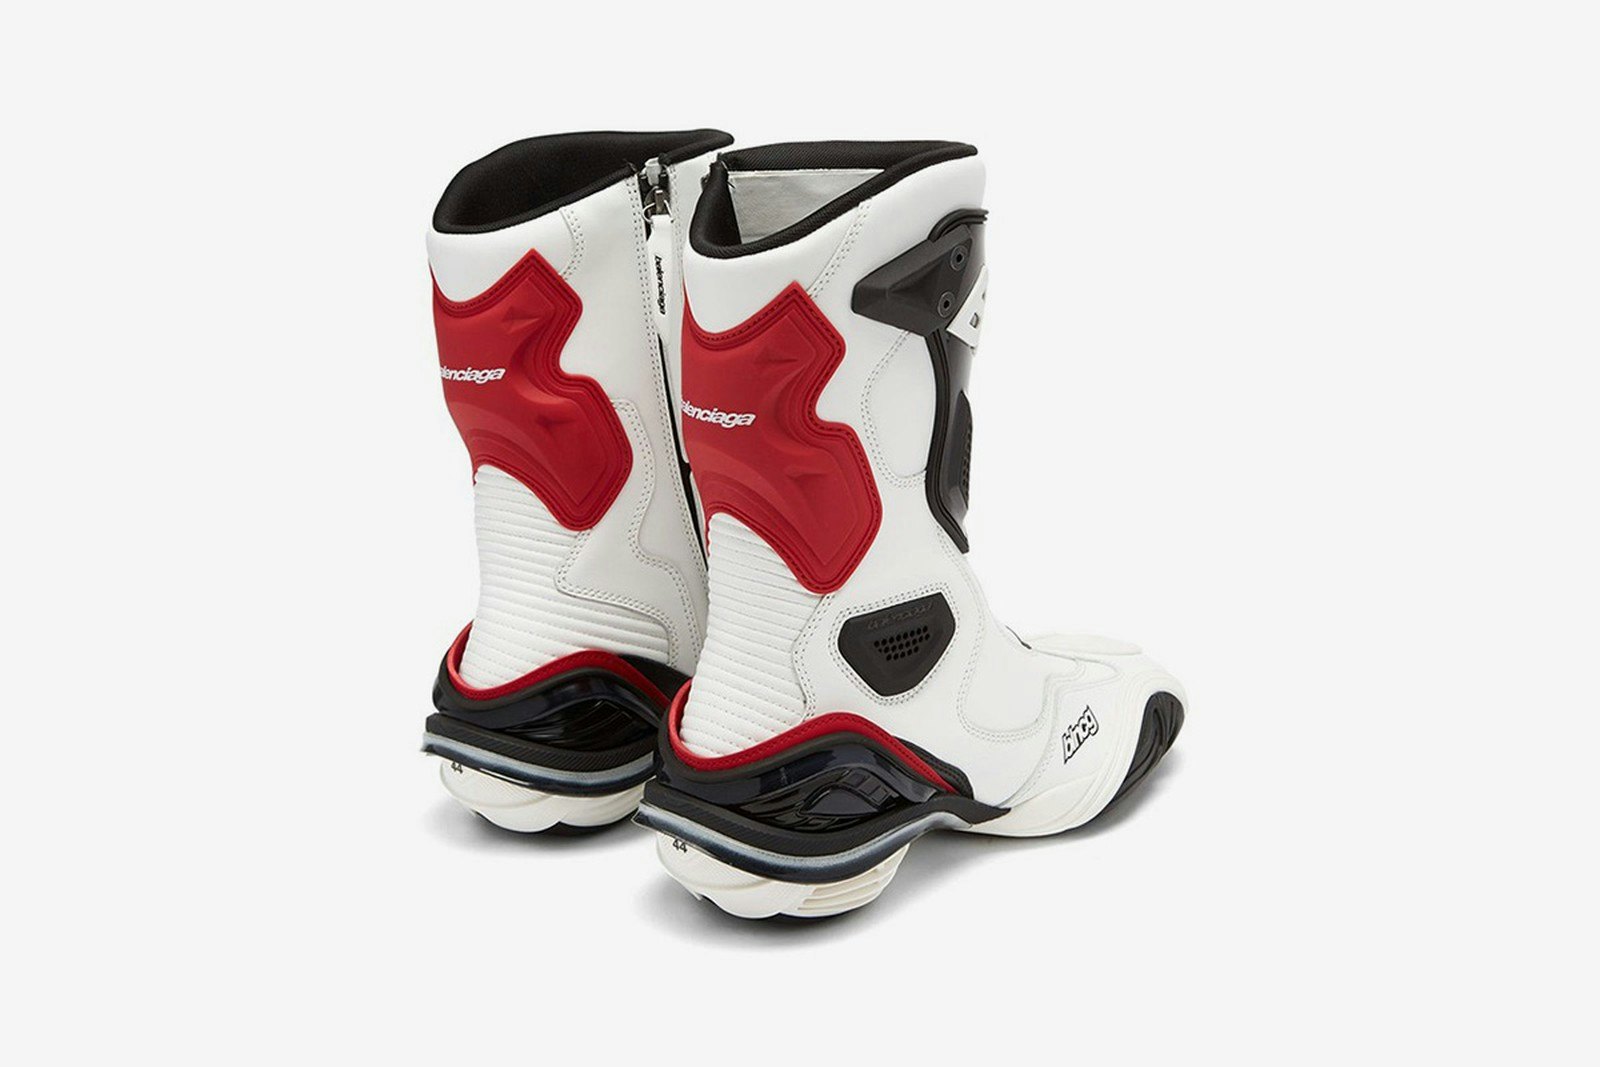 Balenciaga goes full space cowboy with its $1,300 biker boots